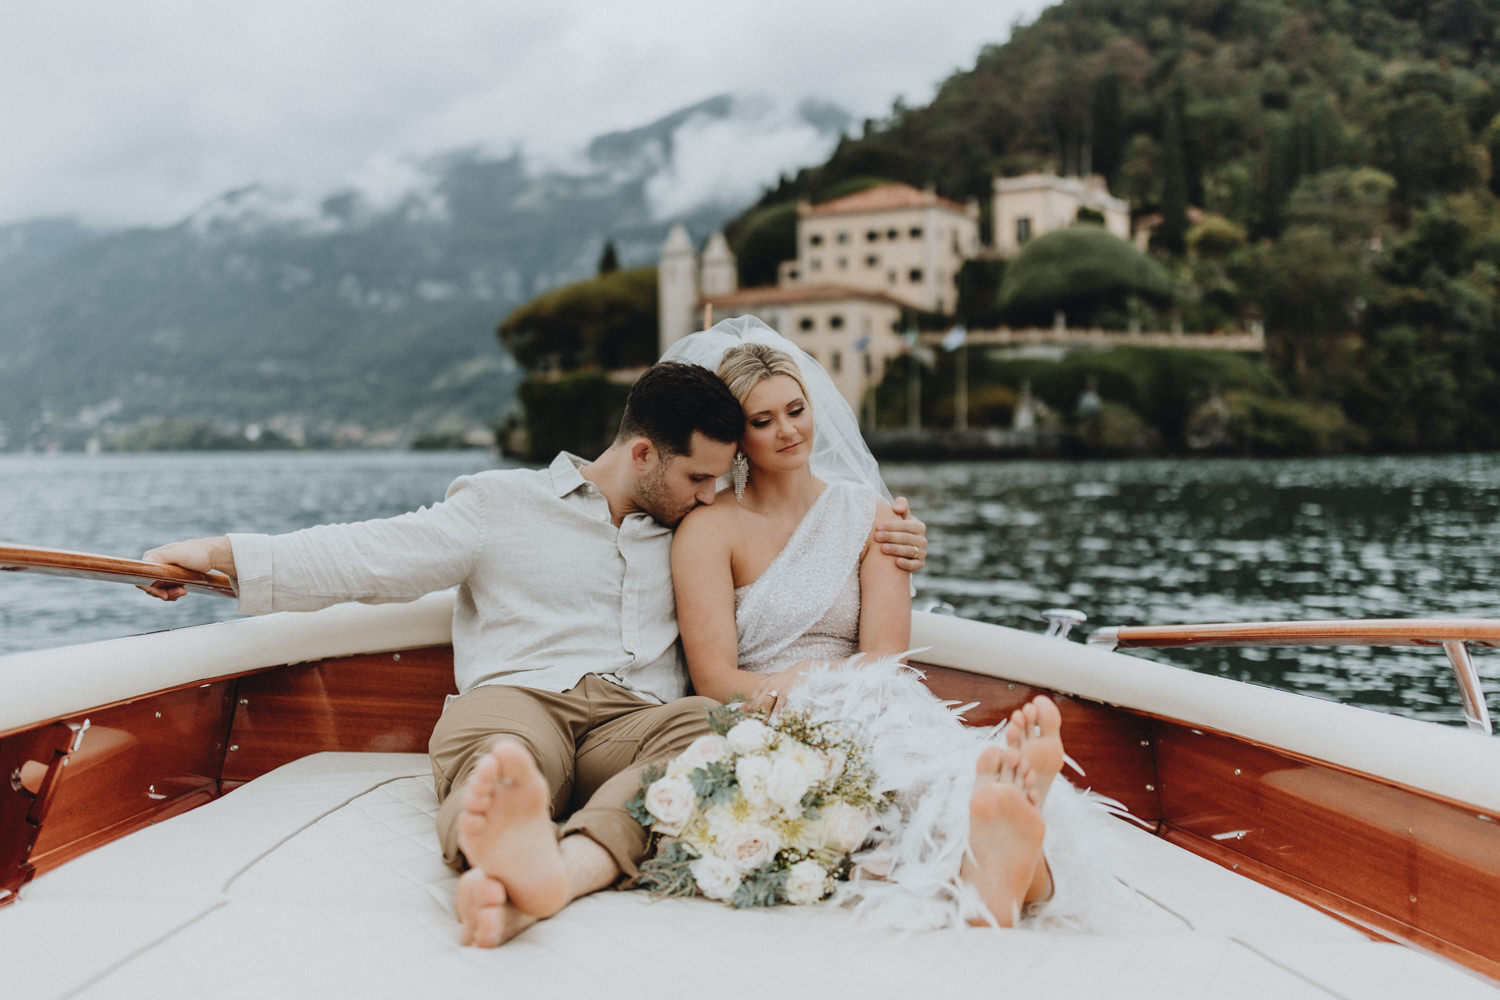 A couple in wedding attire sit on the back of a boat on Lake Como with a bouquet between them, cuddling in front of the impressive Villa del Balbianello